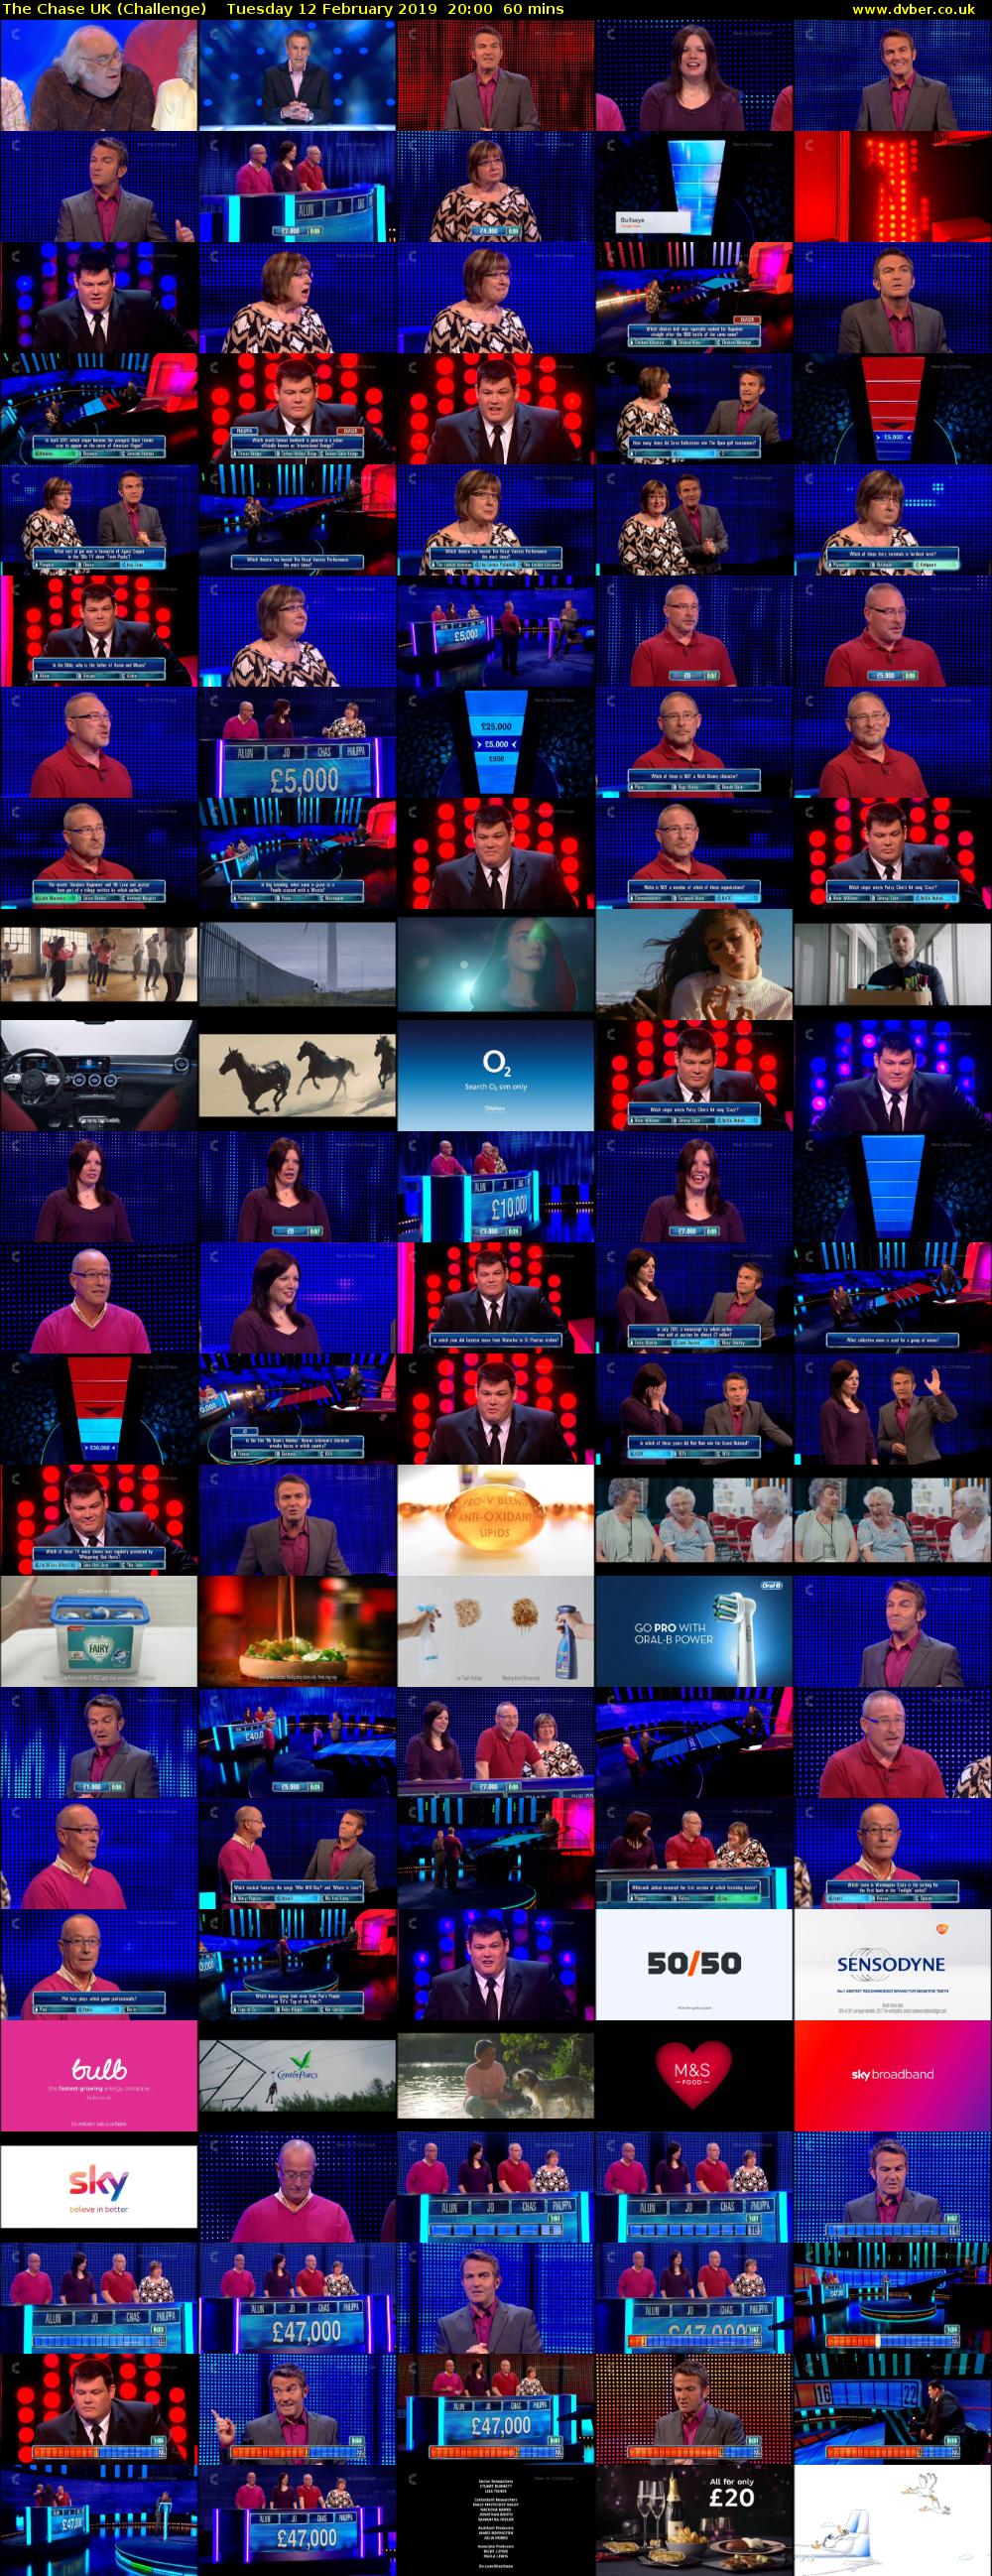 The Chase UK (Challenge) Tuesday 12 February 2019 20:00 - 21:00